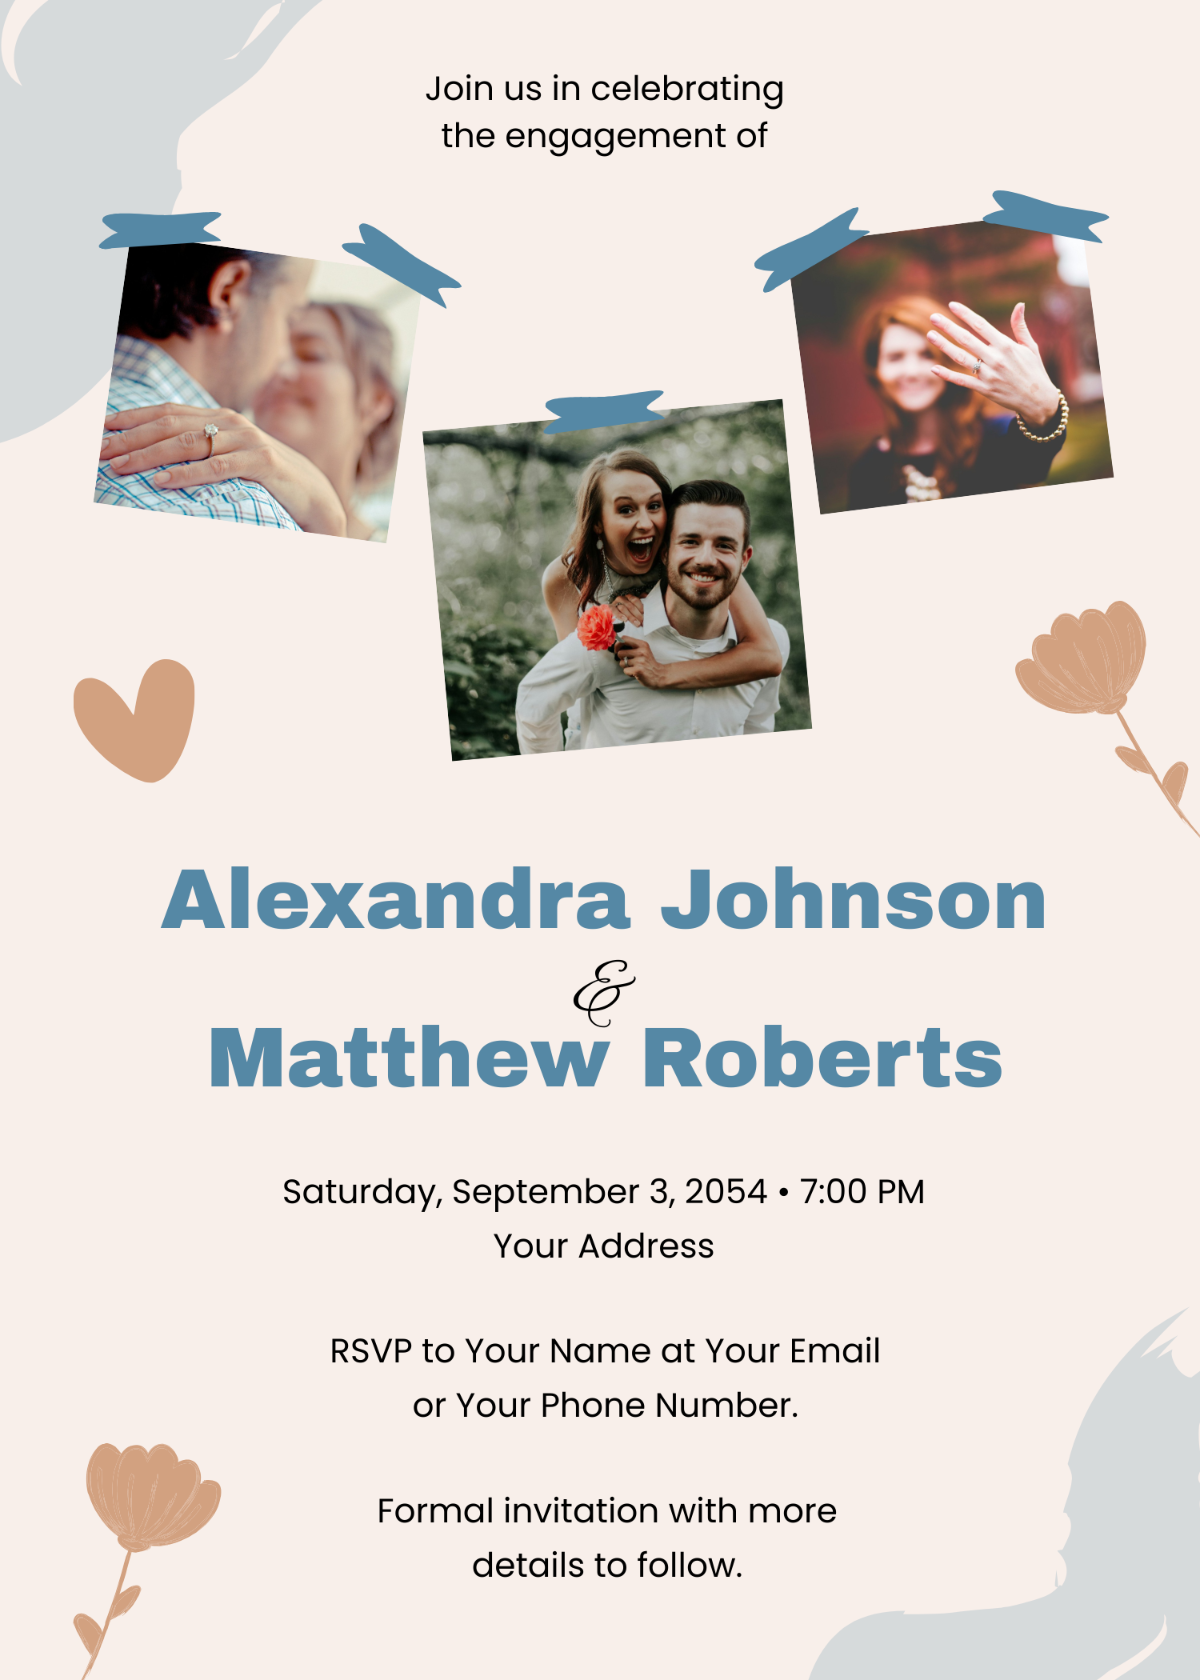 Photo Collage Engagement Party Invitation